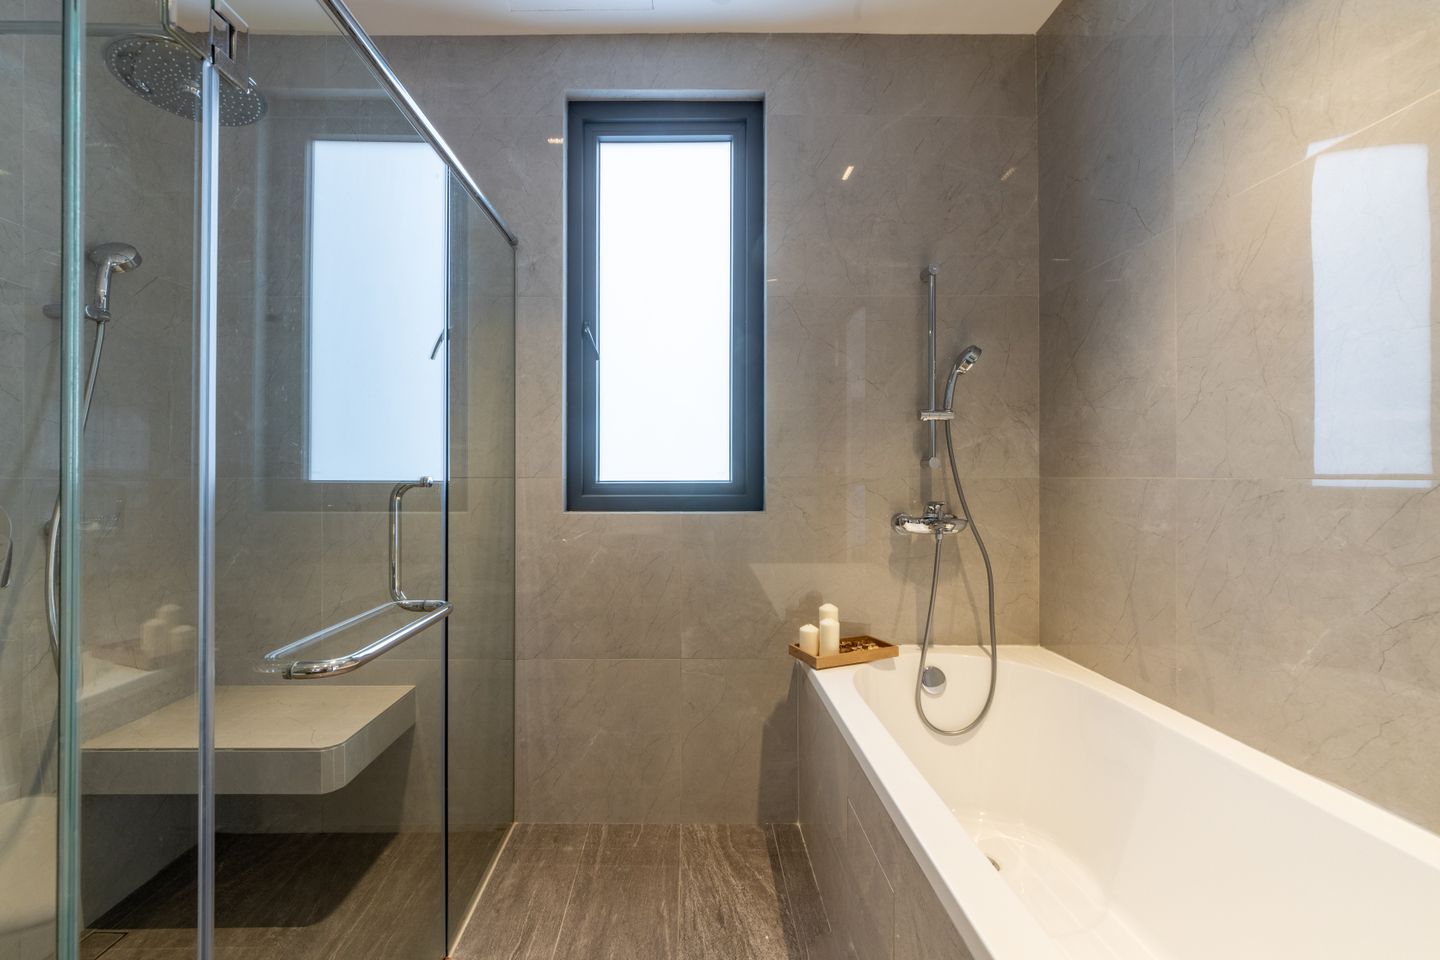 Contemporary Bathroom Design With Glossy Tiling - Livspace